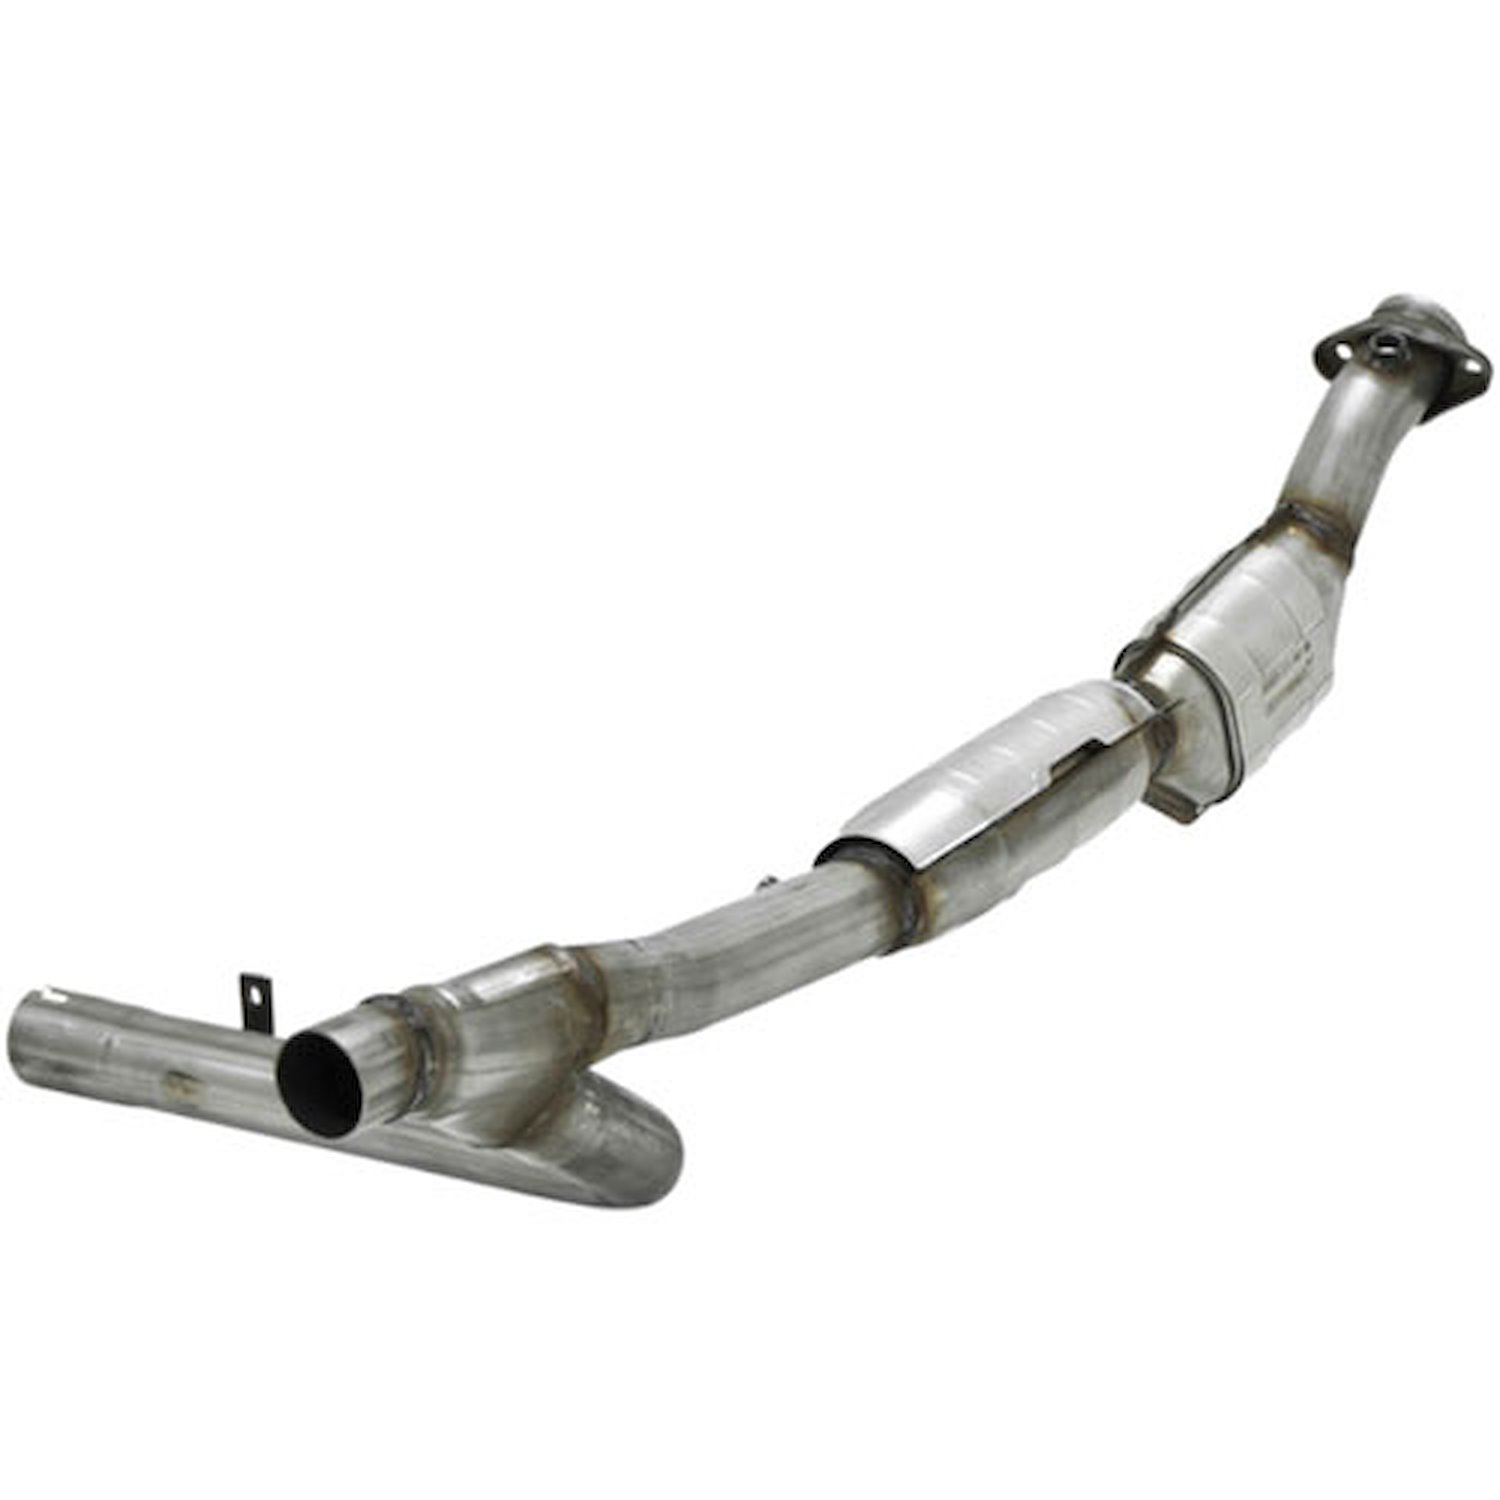 Direct-Fit Catalytic Converter 1997-2000 Ford F-150 4.6L V8 (4WD)